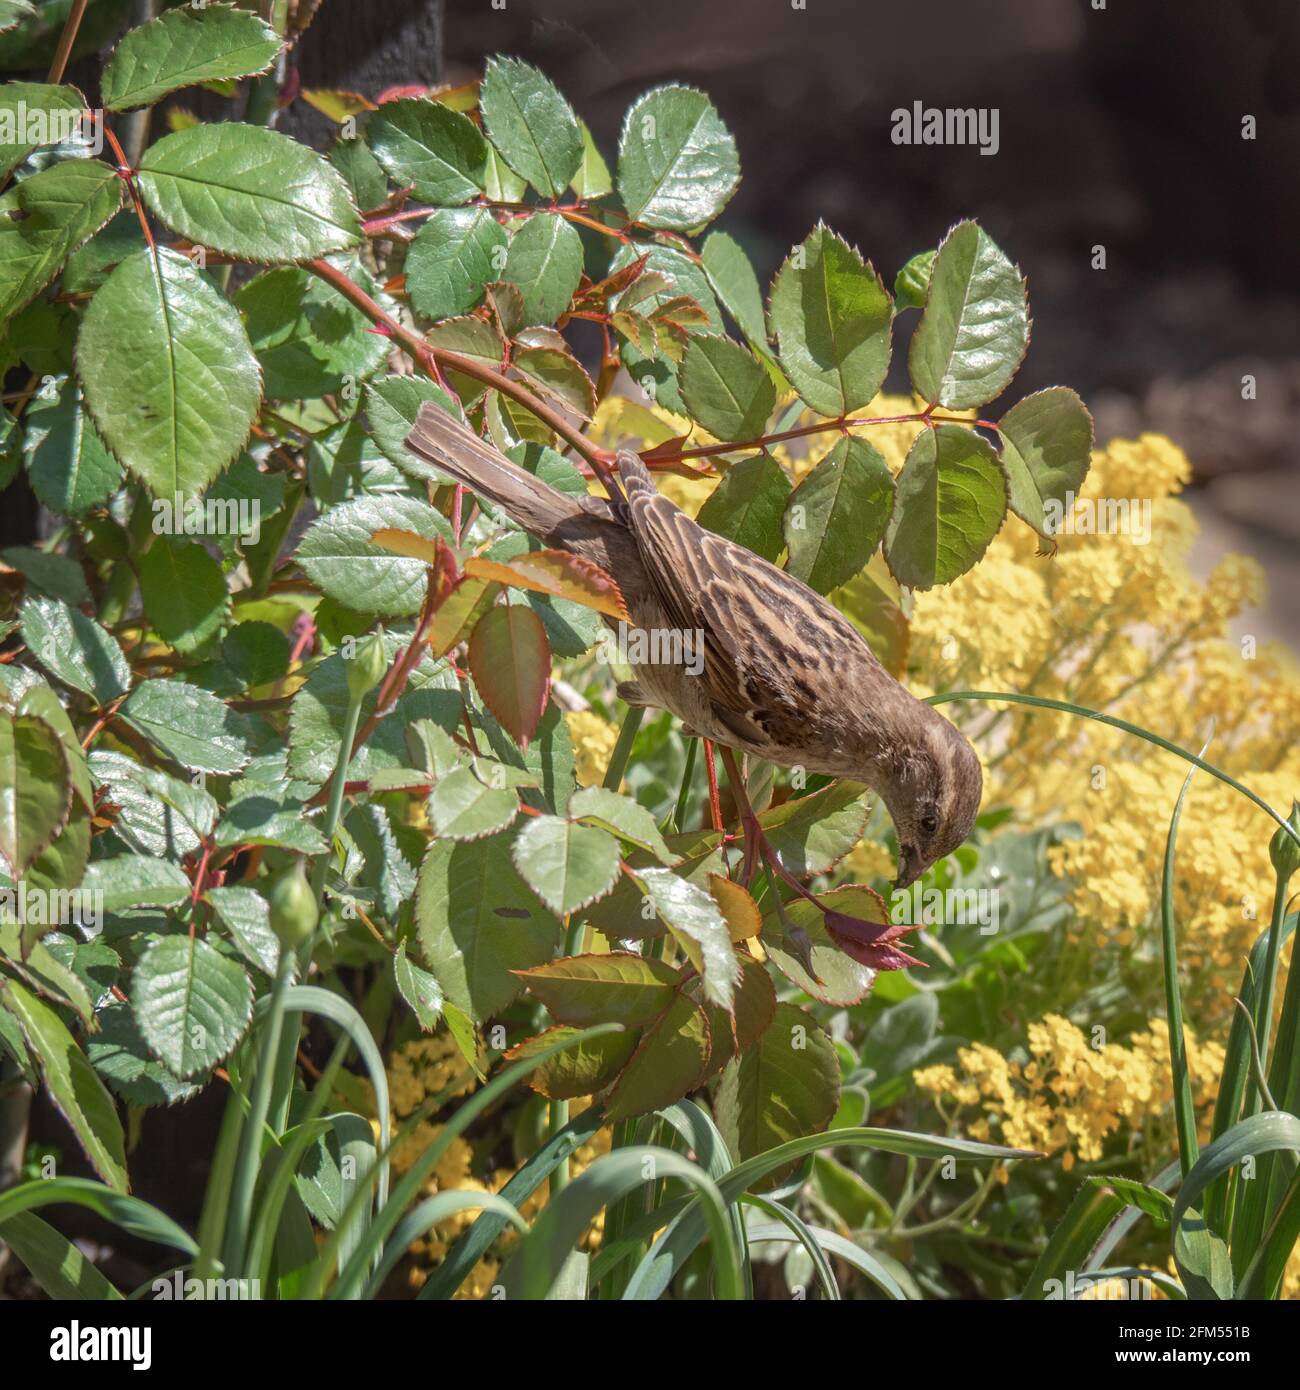 Natural pest control - sparrow eating aphids on my roses! Stock Photo -  Alamy